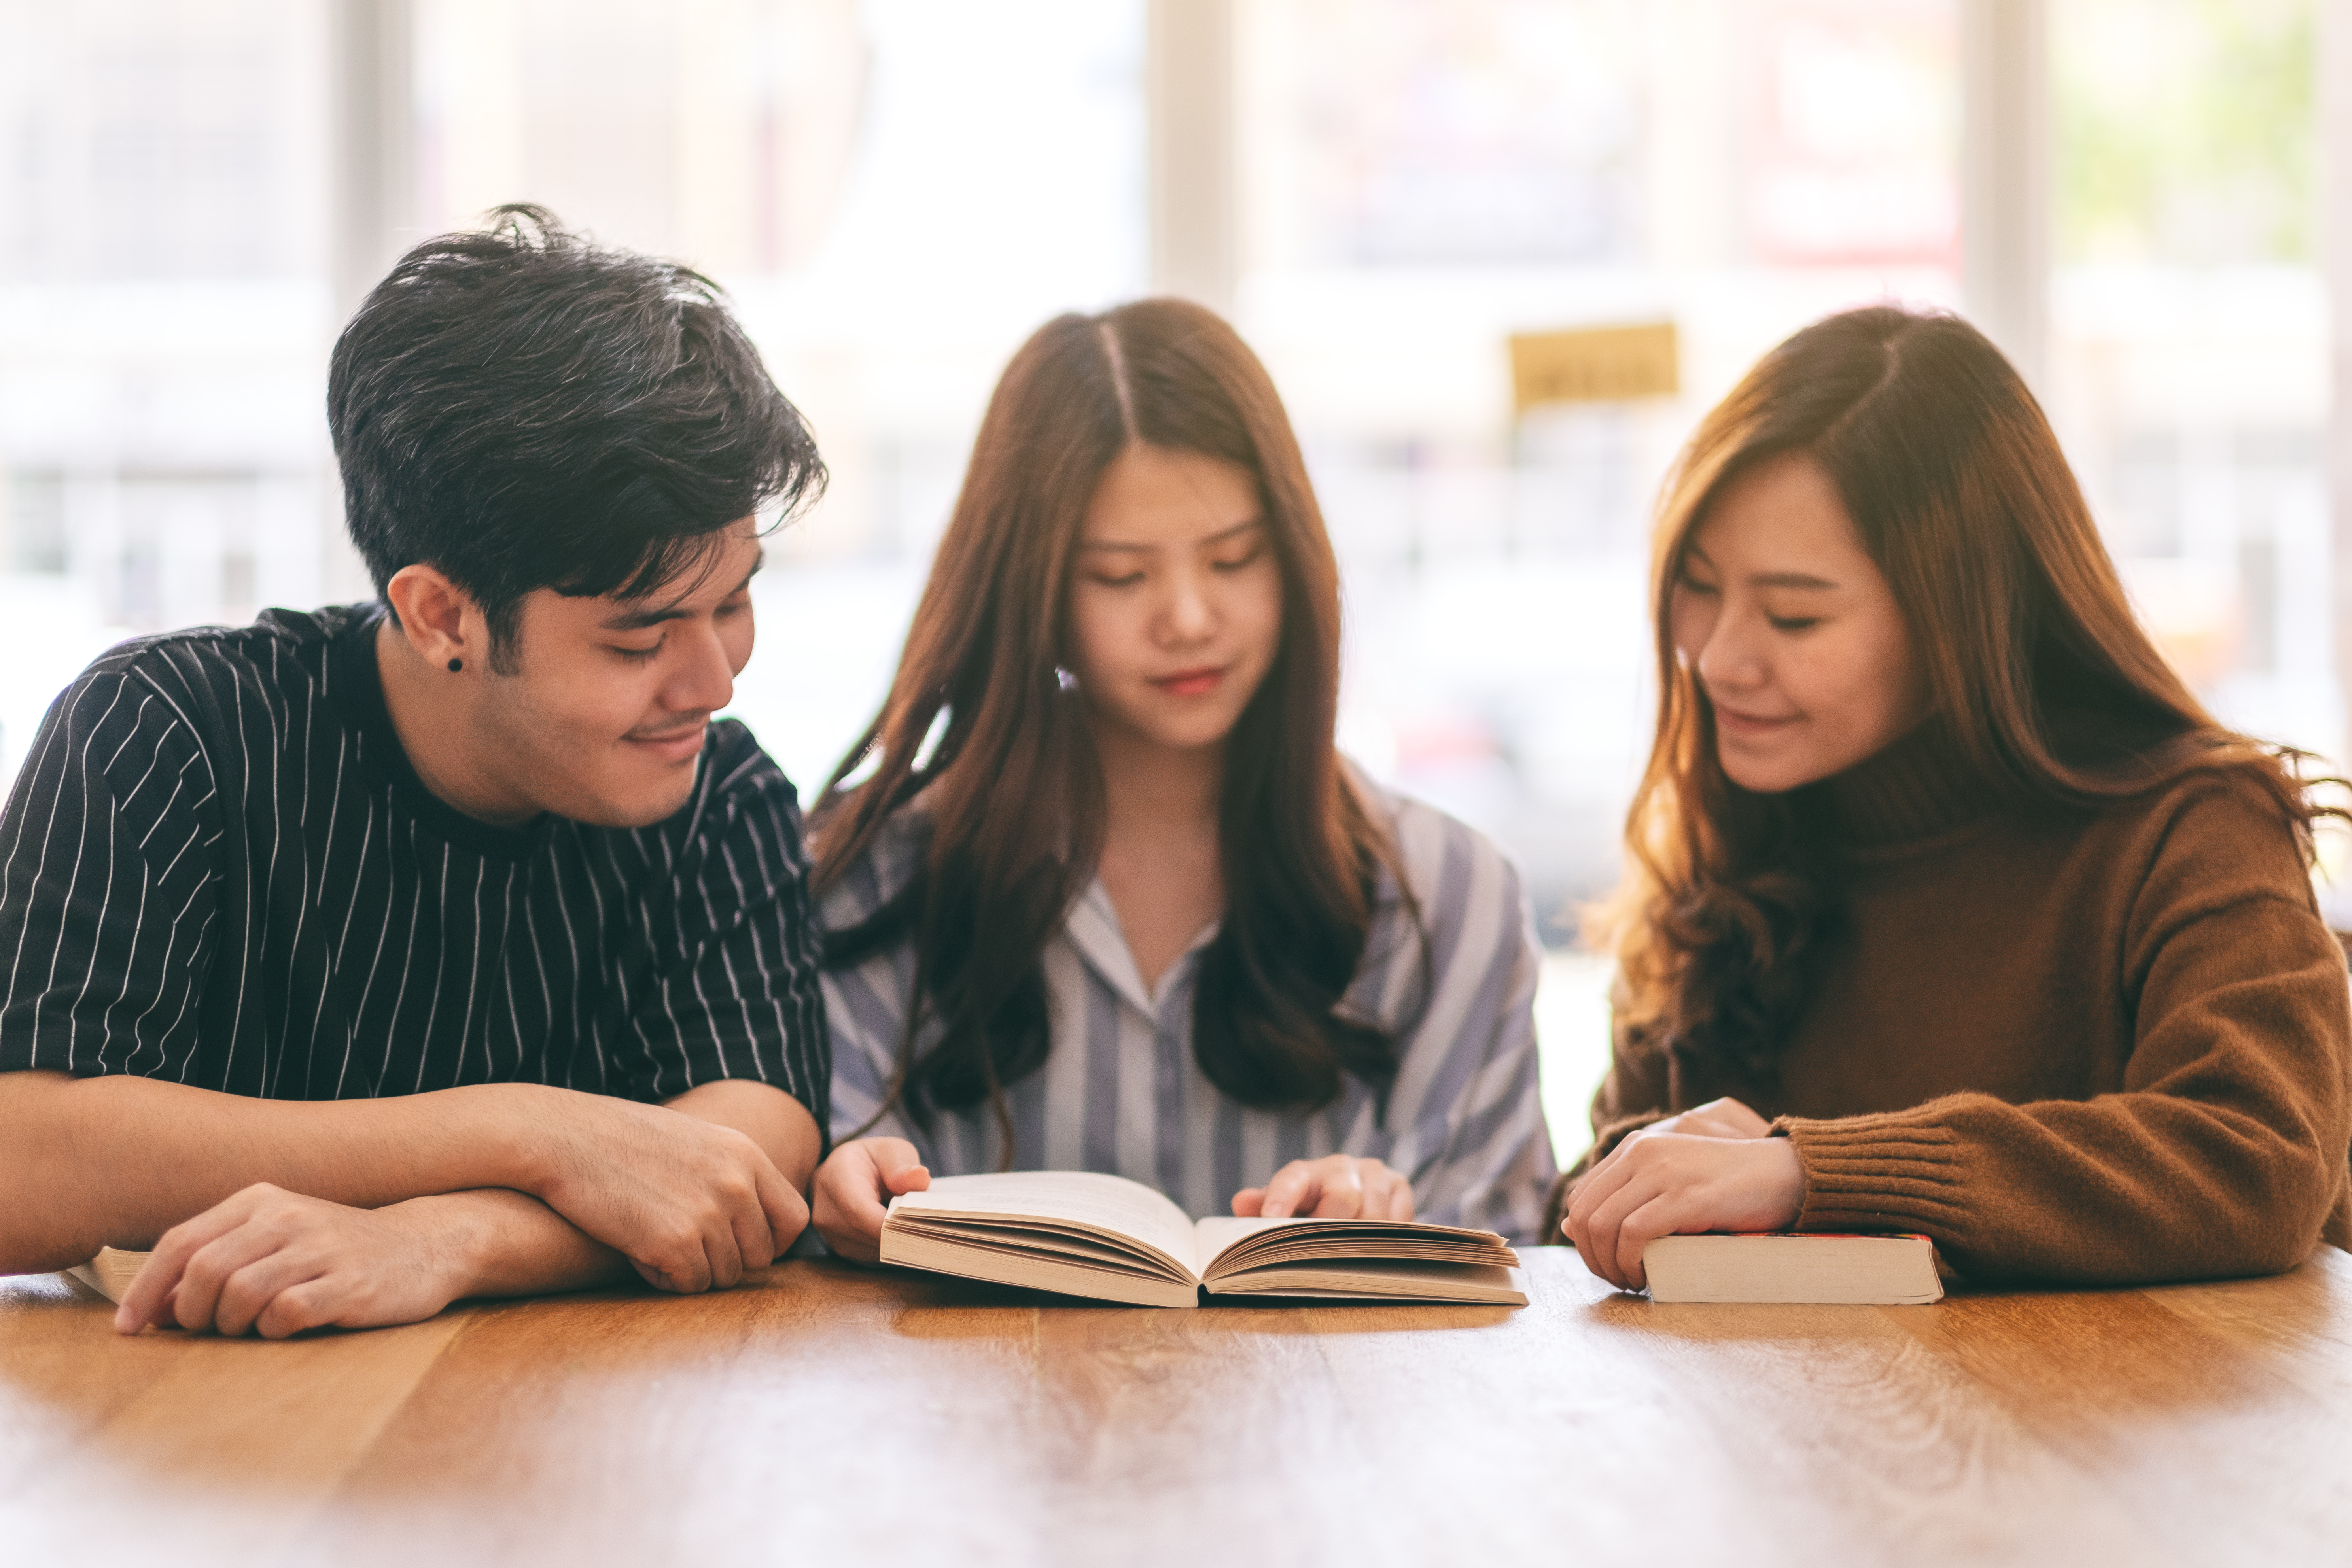 Three teens looking at an open book